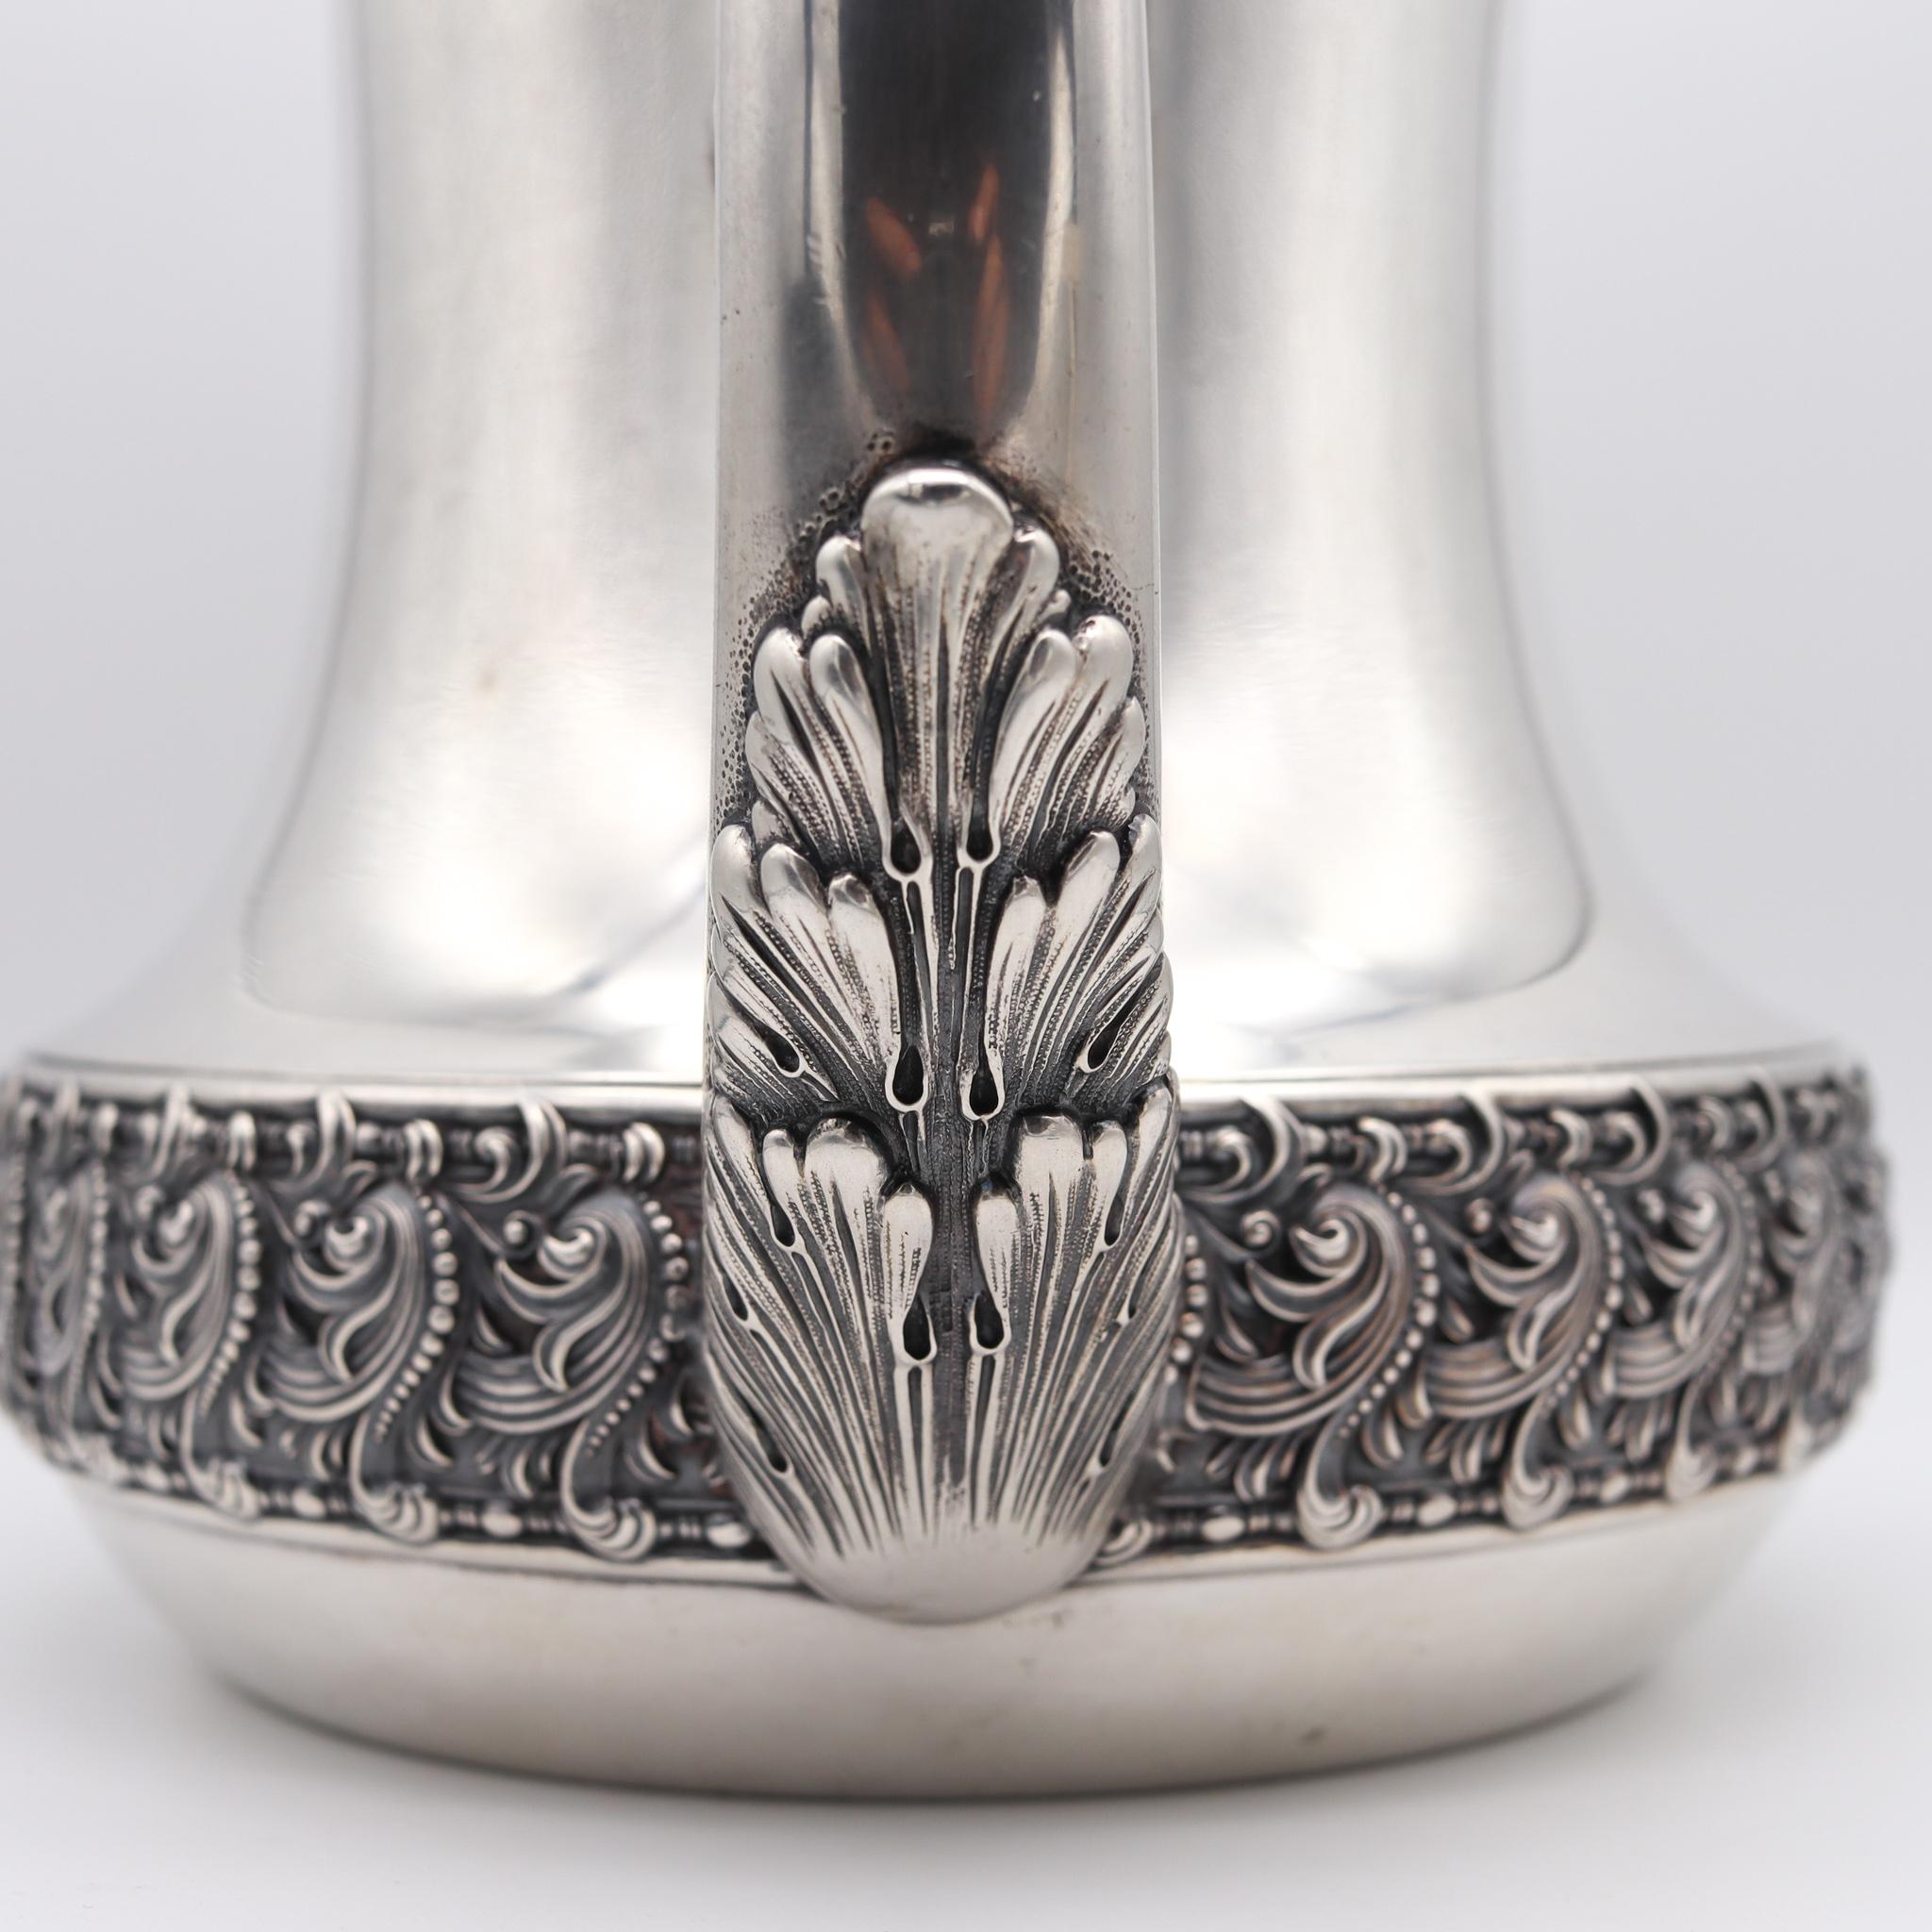 Tiffany & Co 1891 Charles L Tiffany Art Nouveau Water Pitcher in 925 Sterling  3